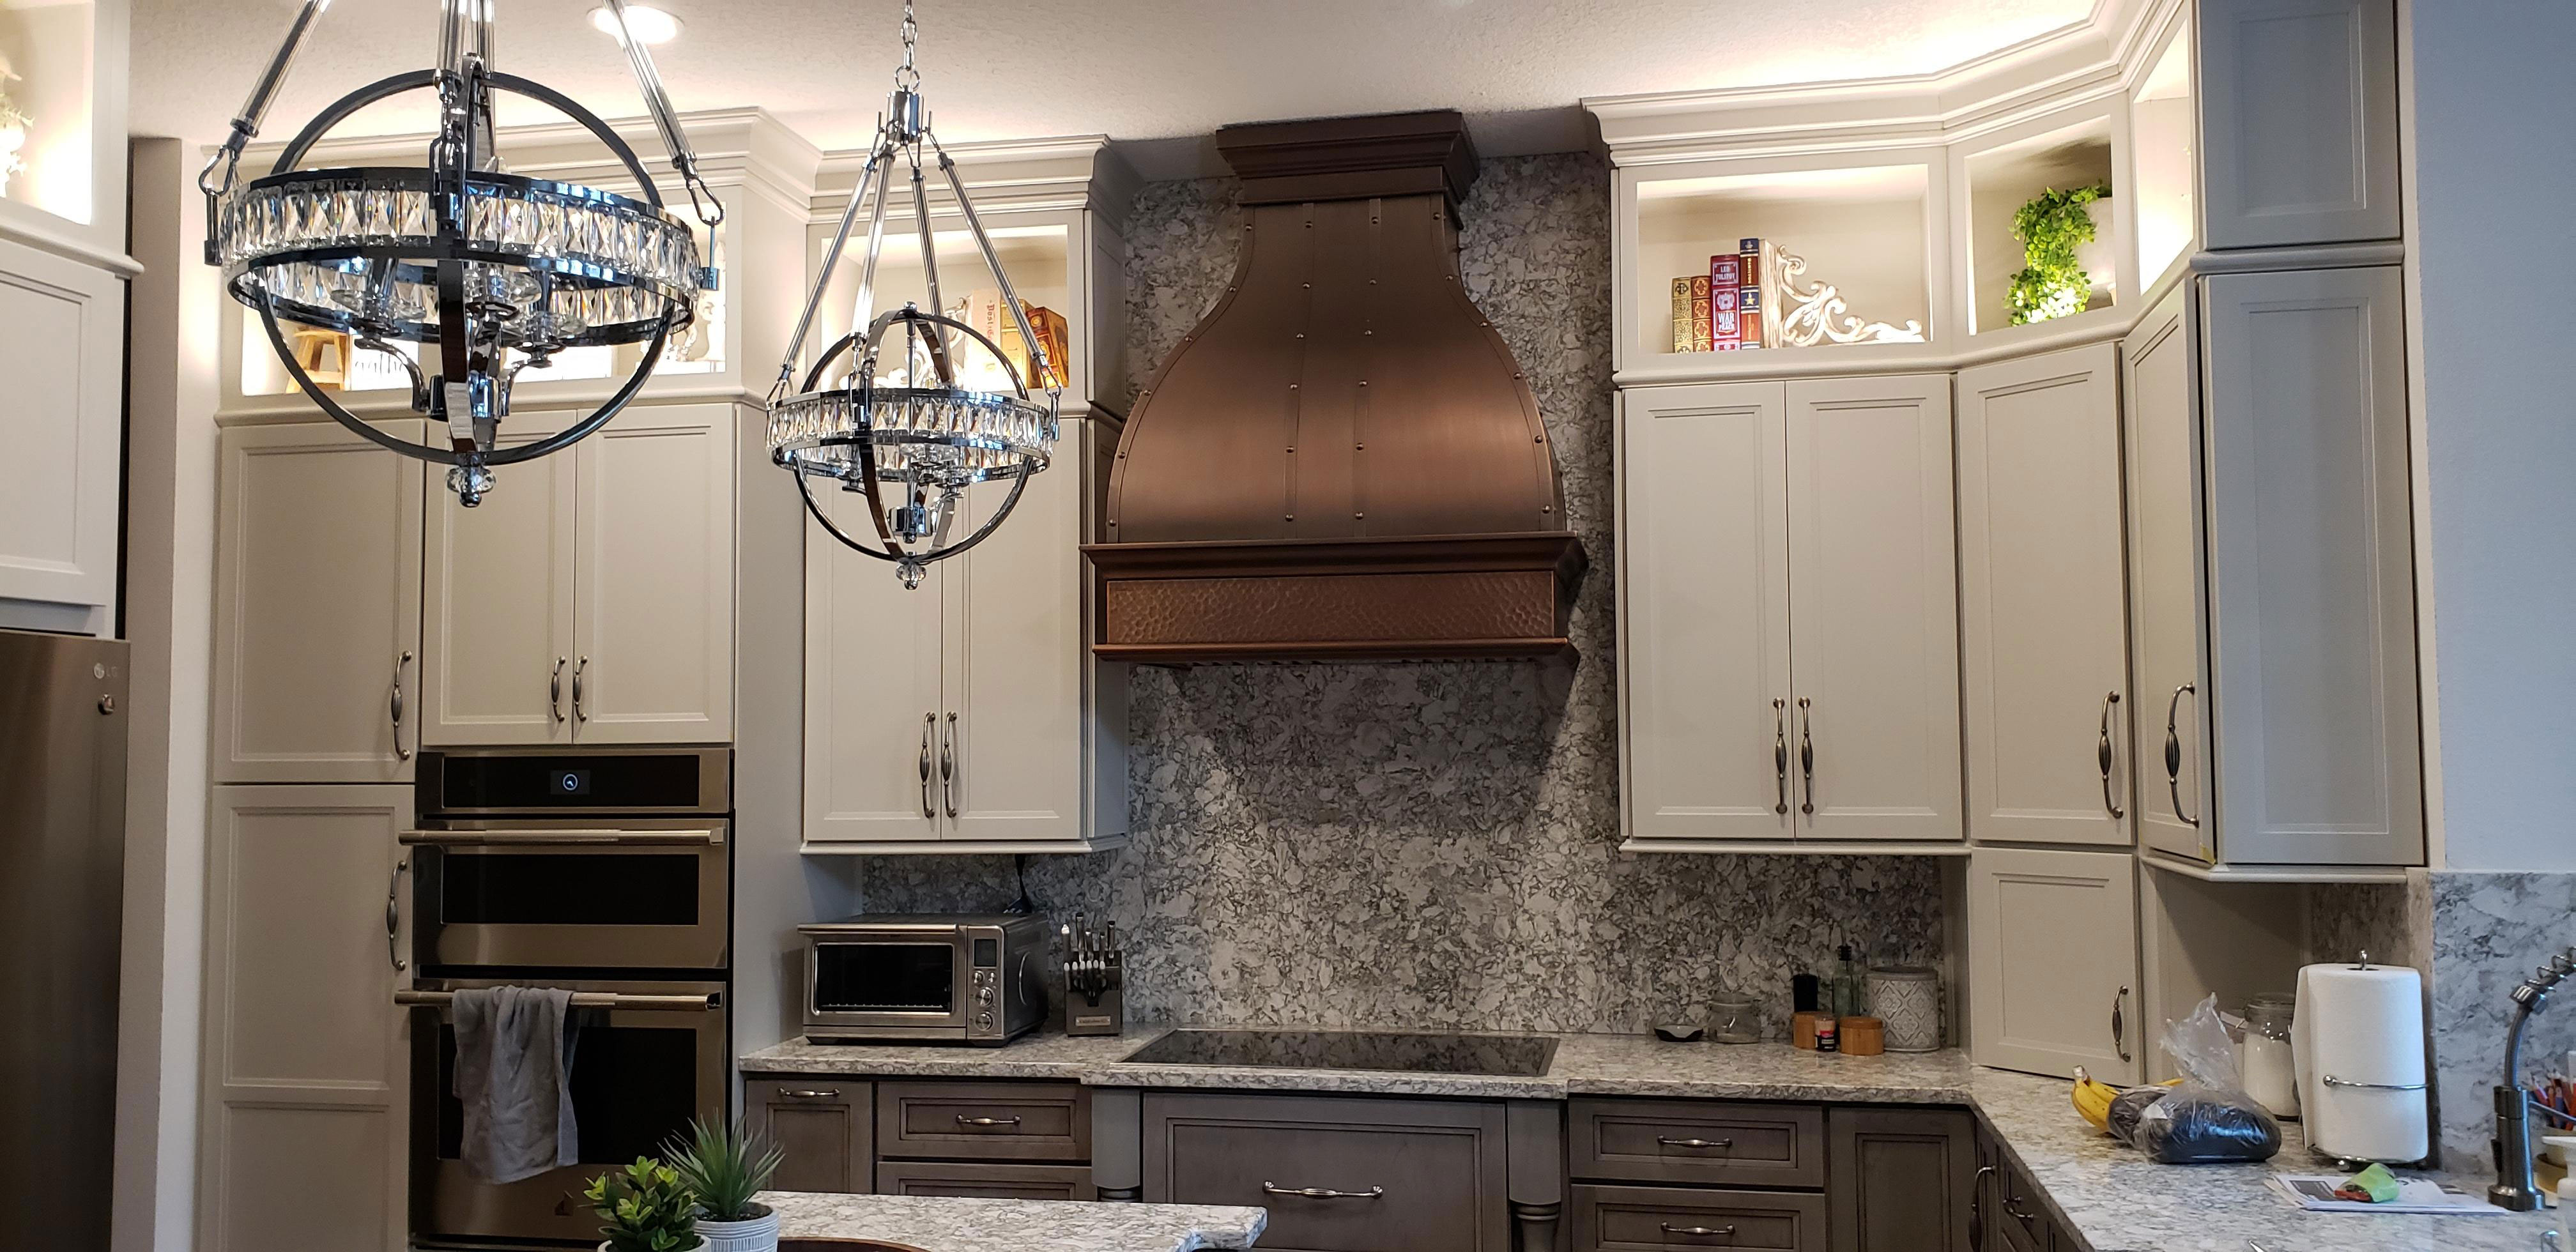 Outsanding kitchen design, consider incorporating range hood that complement the elegance of a french kitchen design